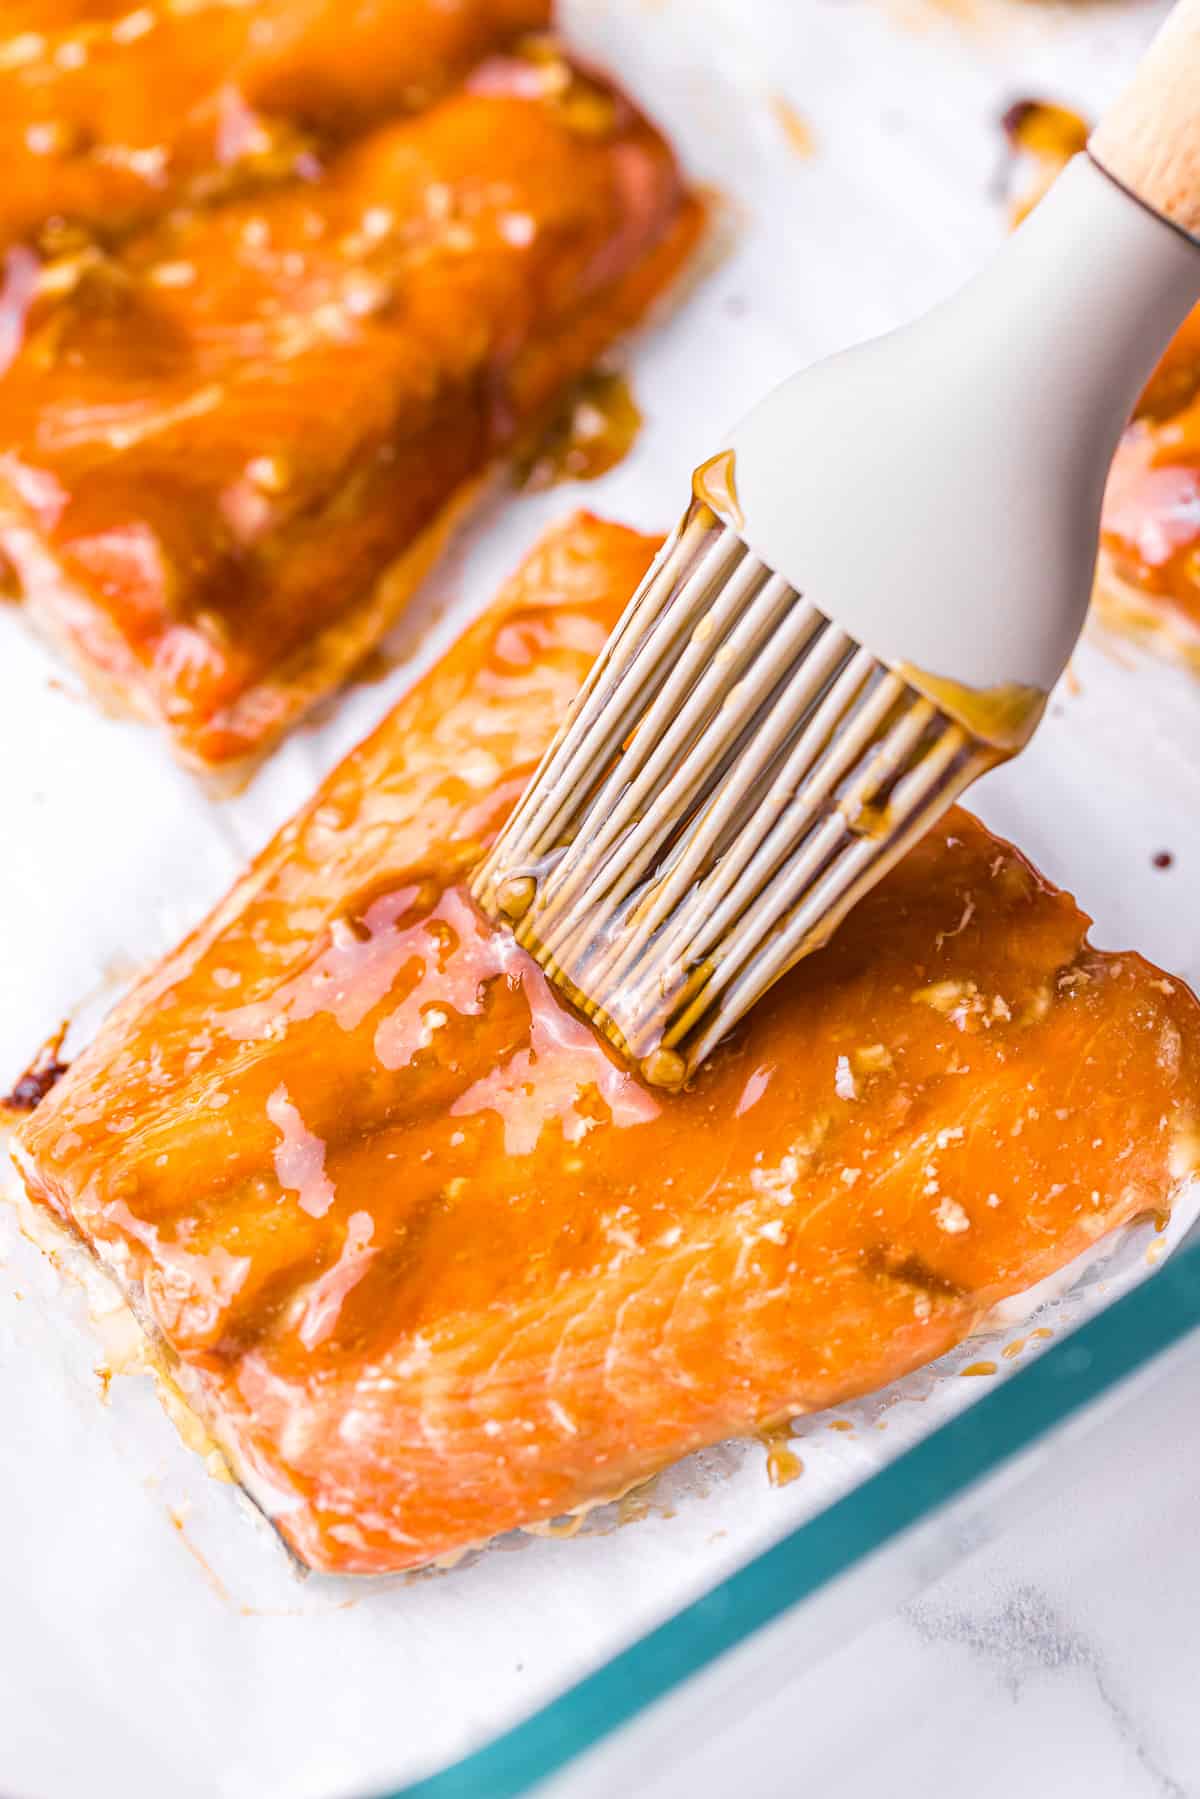 A baking dish filled with glistening salmon fillets coated in thick teriyaki sauce.